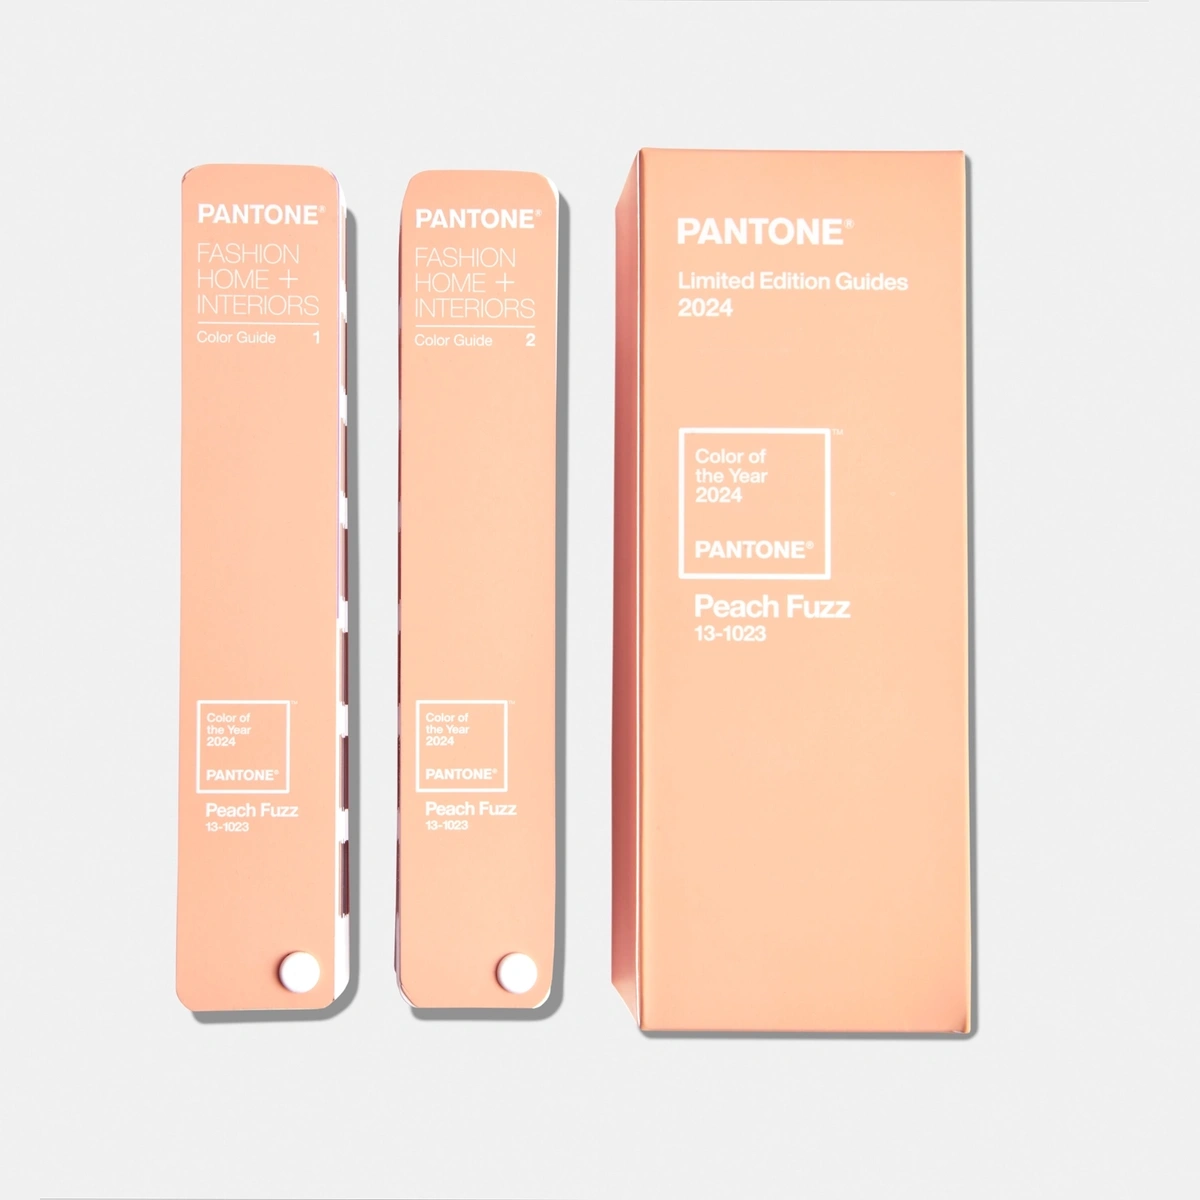 Pantone FHI Color Guide, limited edition color of the year 2024